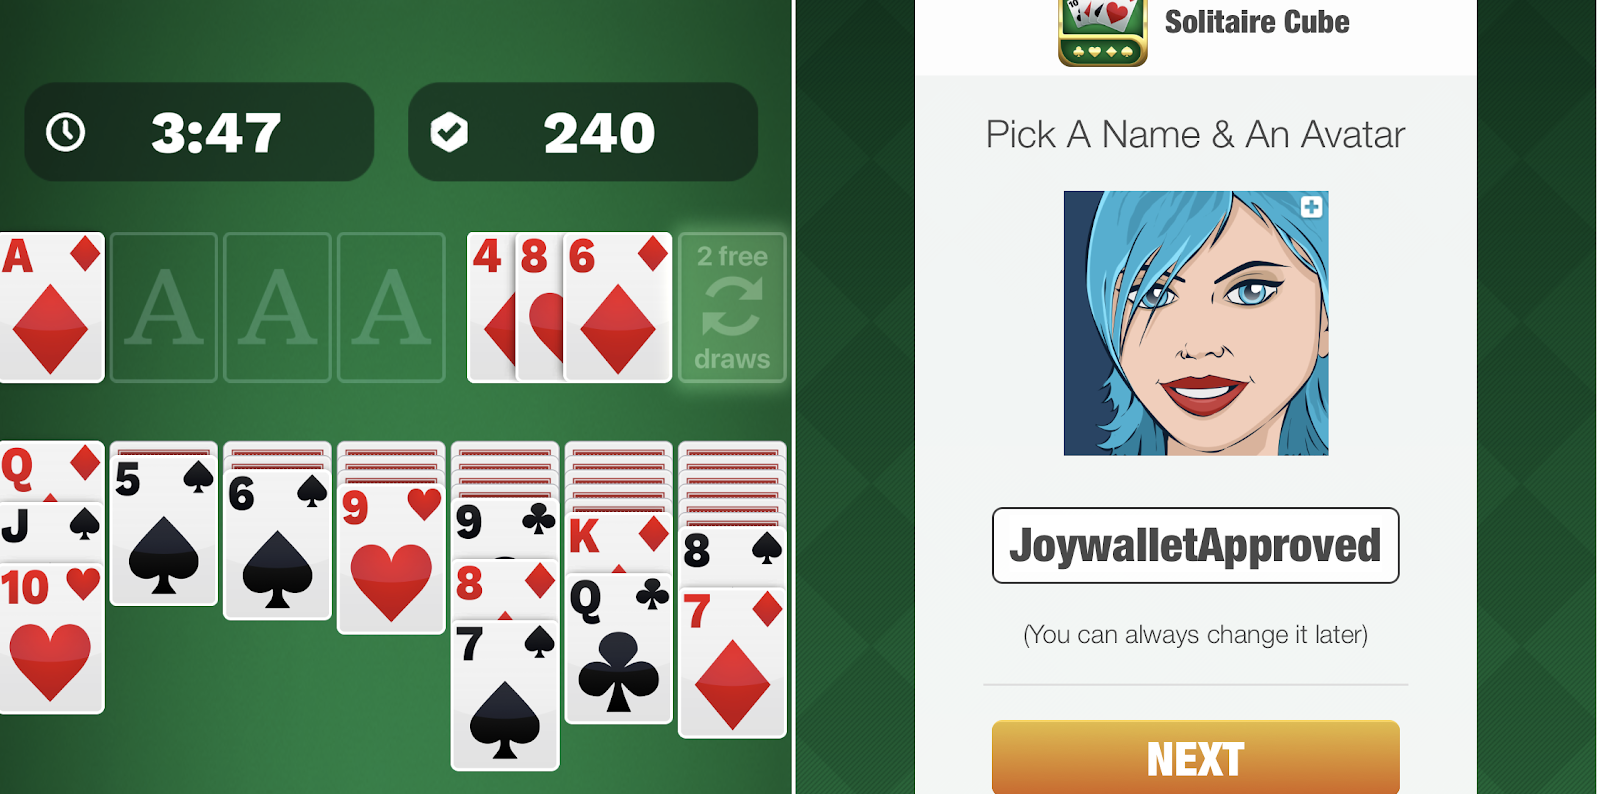 Need Quick Cash? This App Pays You To Play Solitaire (2020